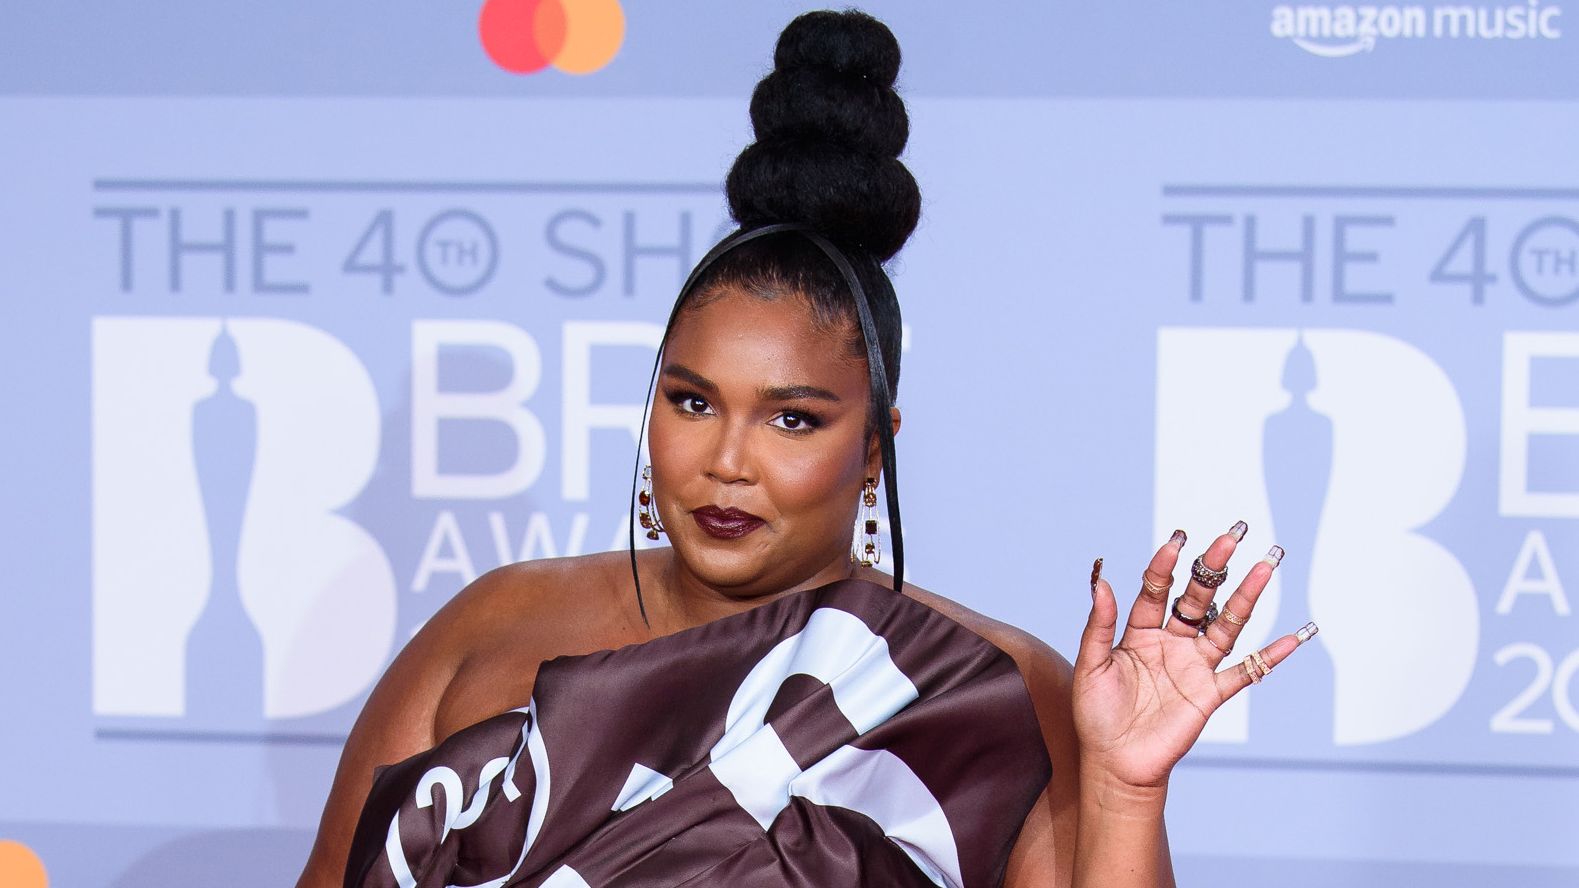 Lizzo Shows Inspiring Self-Love in New Video: “I Am the Beauty